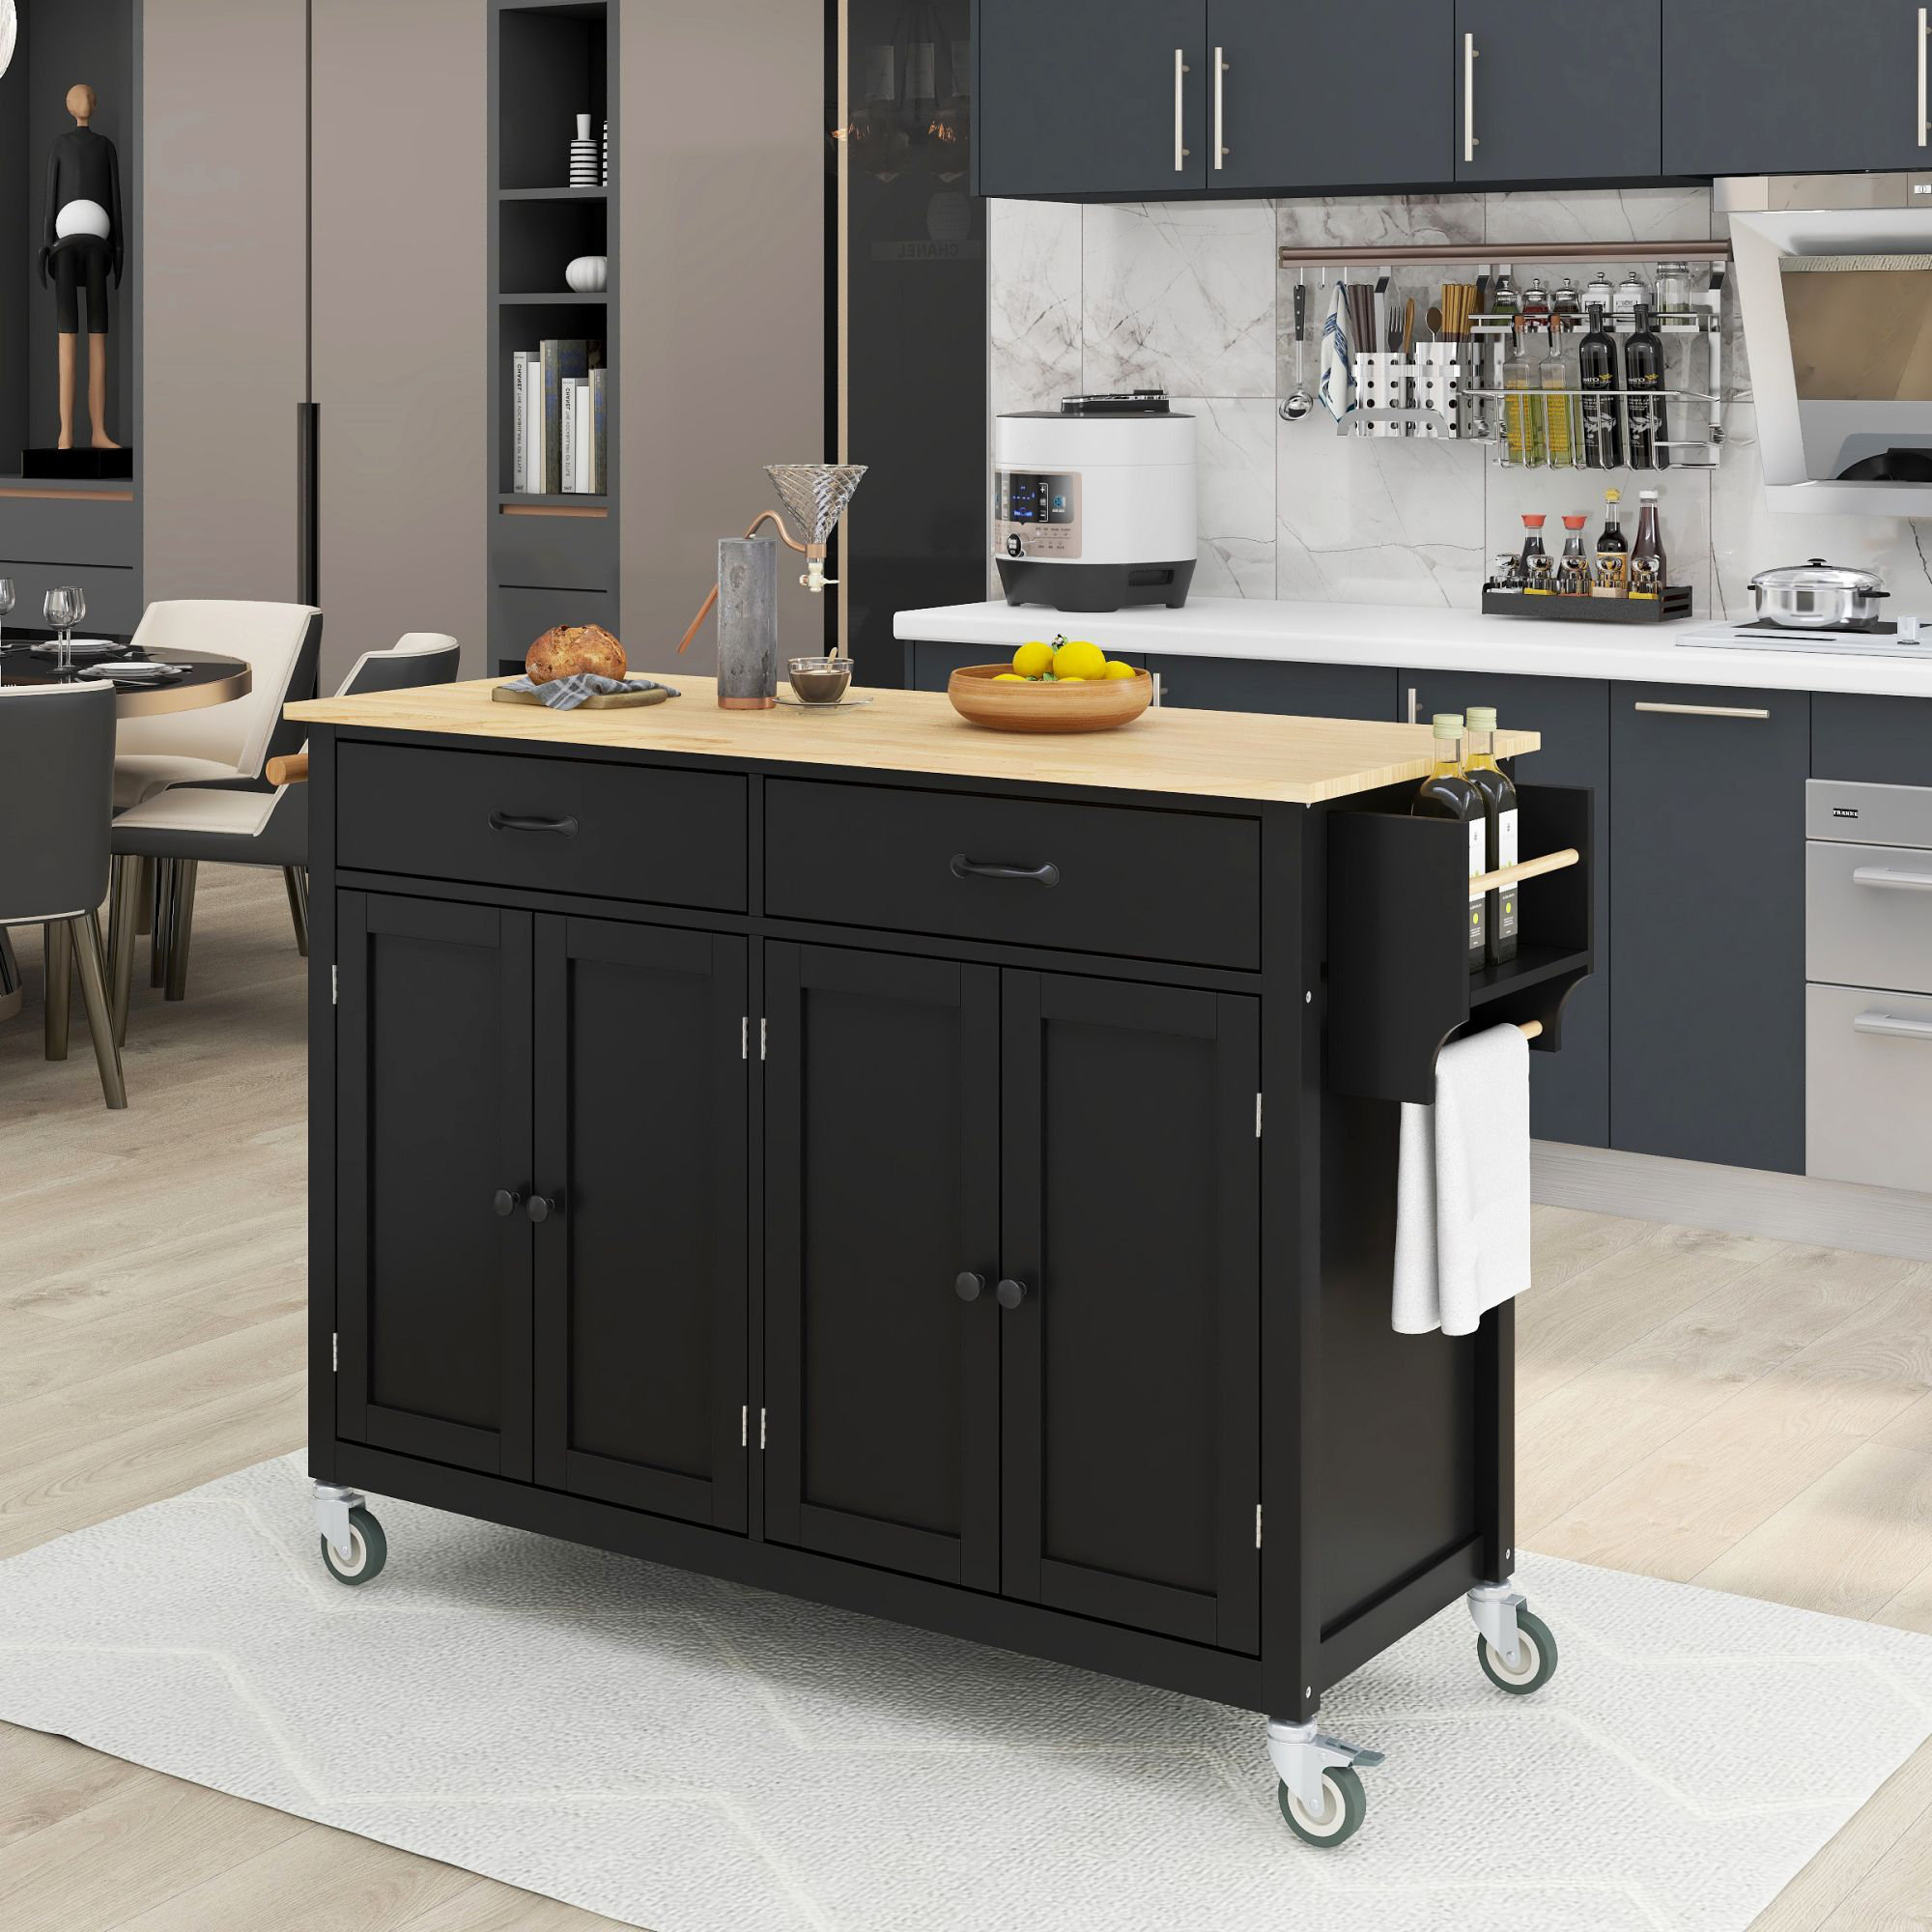 Catering Trolley with Universal Wheels for Kitchen Collecting A Dining Car Restaurants and Care Homes Move PP Service Trolley Hotels Color : Gray 